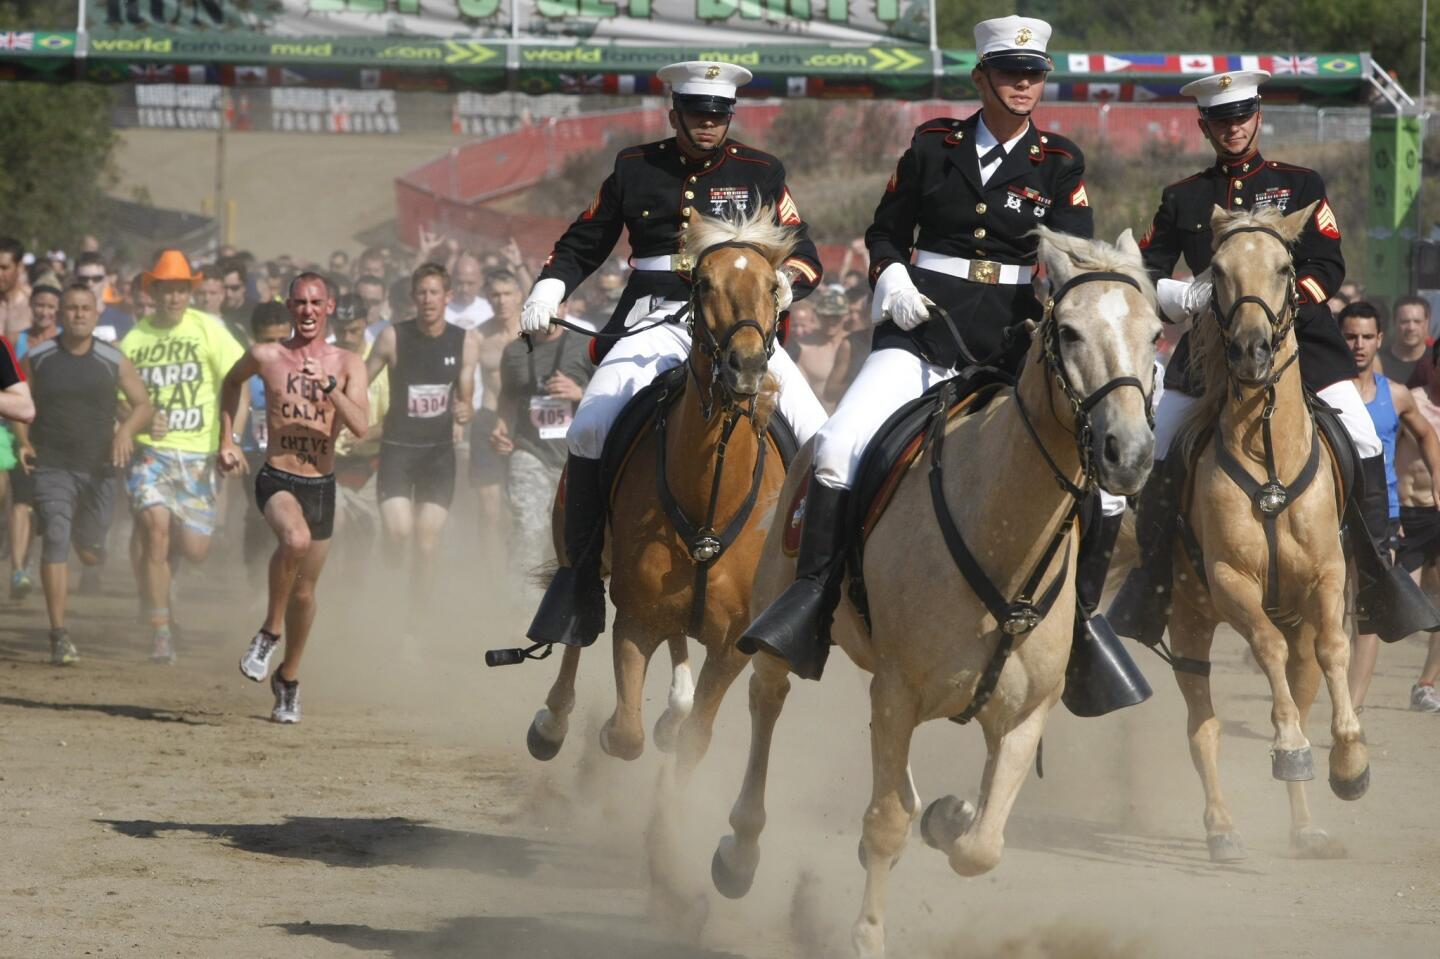 The Marine Corps Mounted Color Guard leads the first heat of runners at the start of the 20th annual Marine Corps World Famous Mud Run at Camp Pendleton. About 6,000 participants ran the 10K course Saturday, but more than 30,000 people registered so the run will take place over three weekends in June. For many it's less about competition than the carnival atmosphere. Some of the $90 entry fee goes to the Wounded Warrior Project.